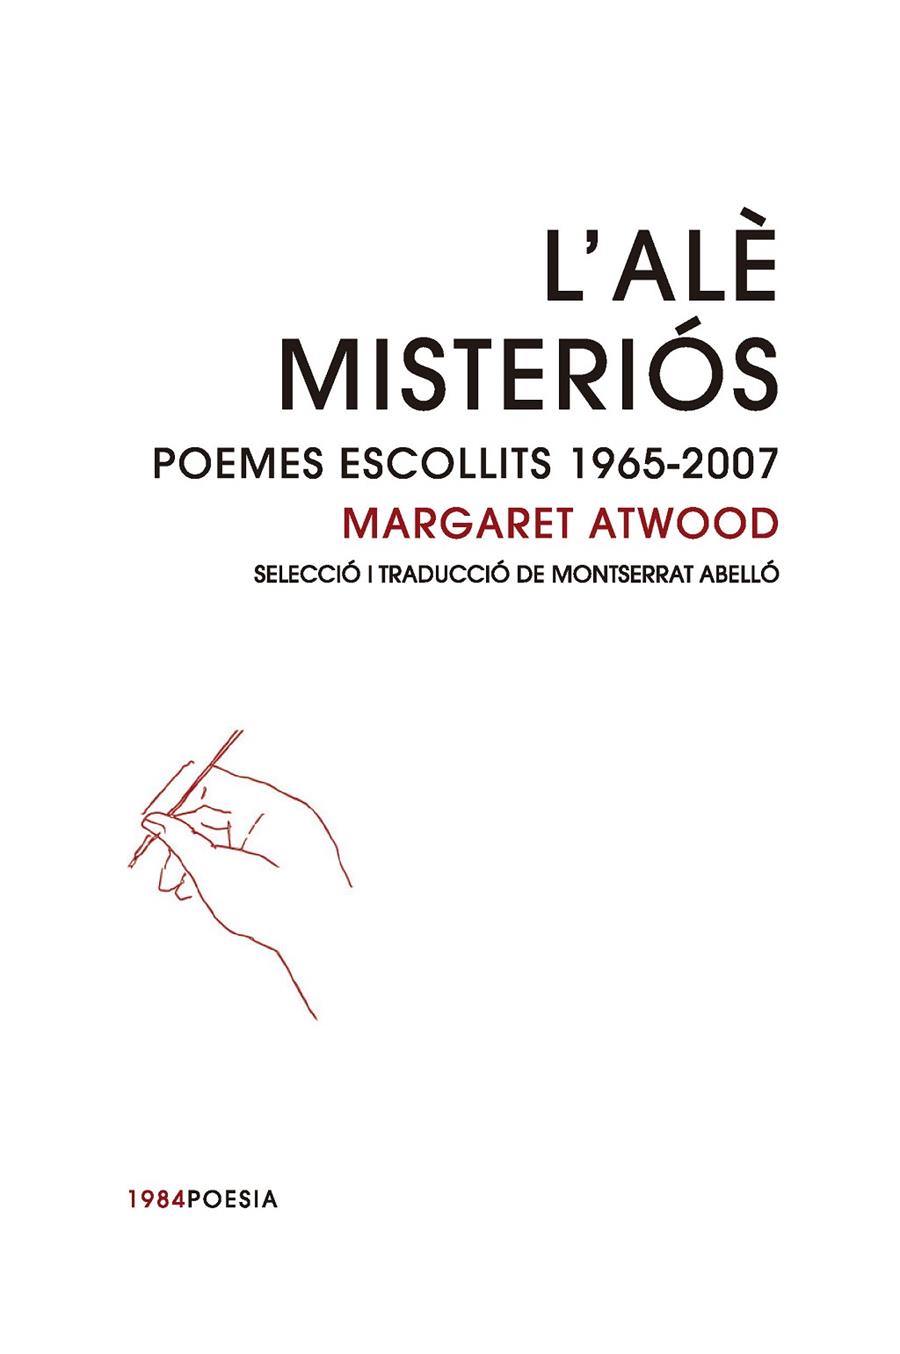 ALE MISTERIOS, L'. POEMES ESCOLLITS 1965-2007 | 9788416987641 | ATWOOD, MARGARET